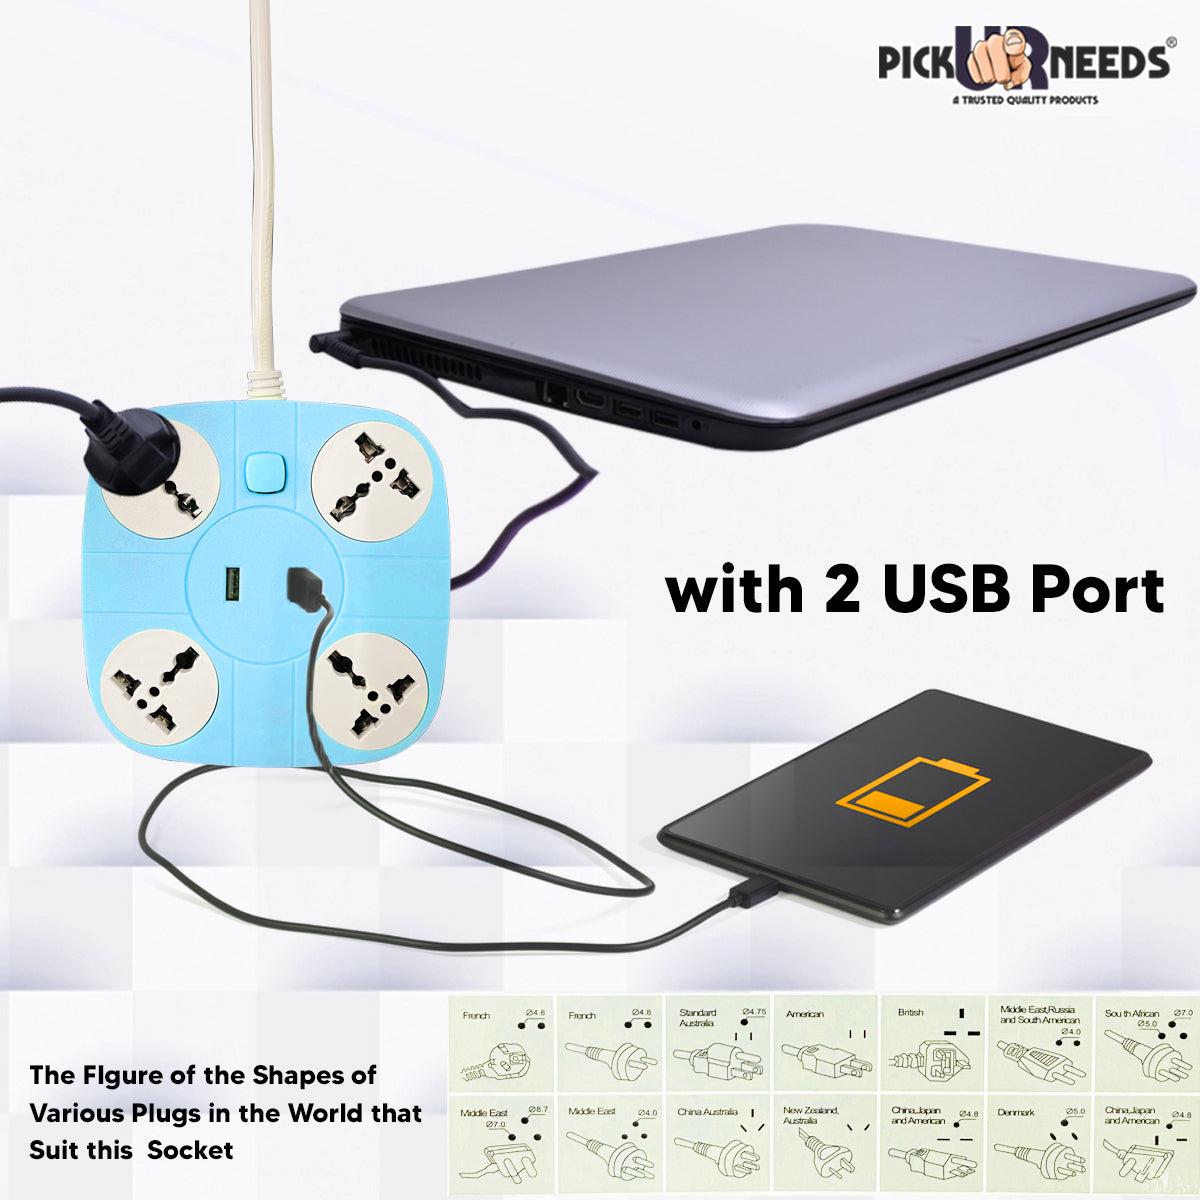 Pick Ur Needs®Extension Cord with 2 USB Charging Ports and 4 Socket - 10 AMP Heavy Duty for Multiple Devices Smartphone Tablet Laptop